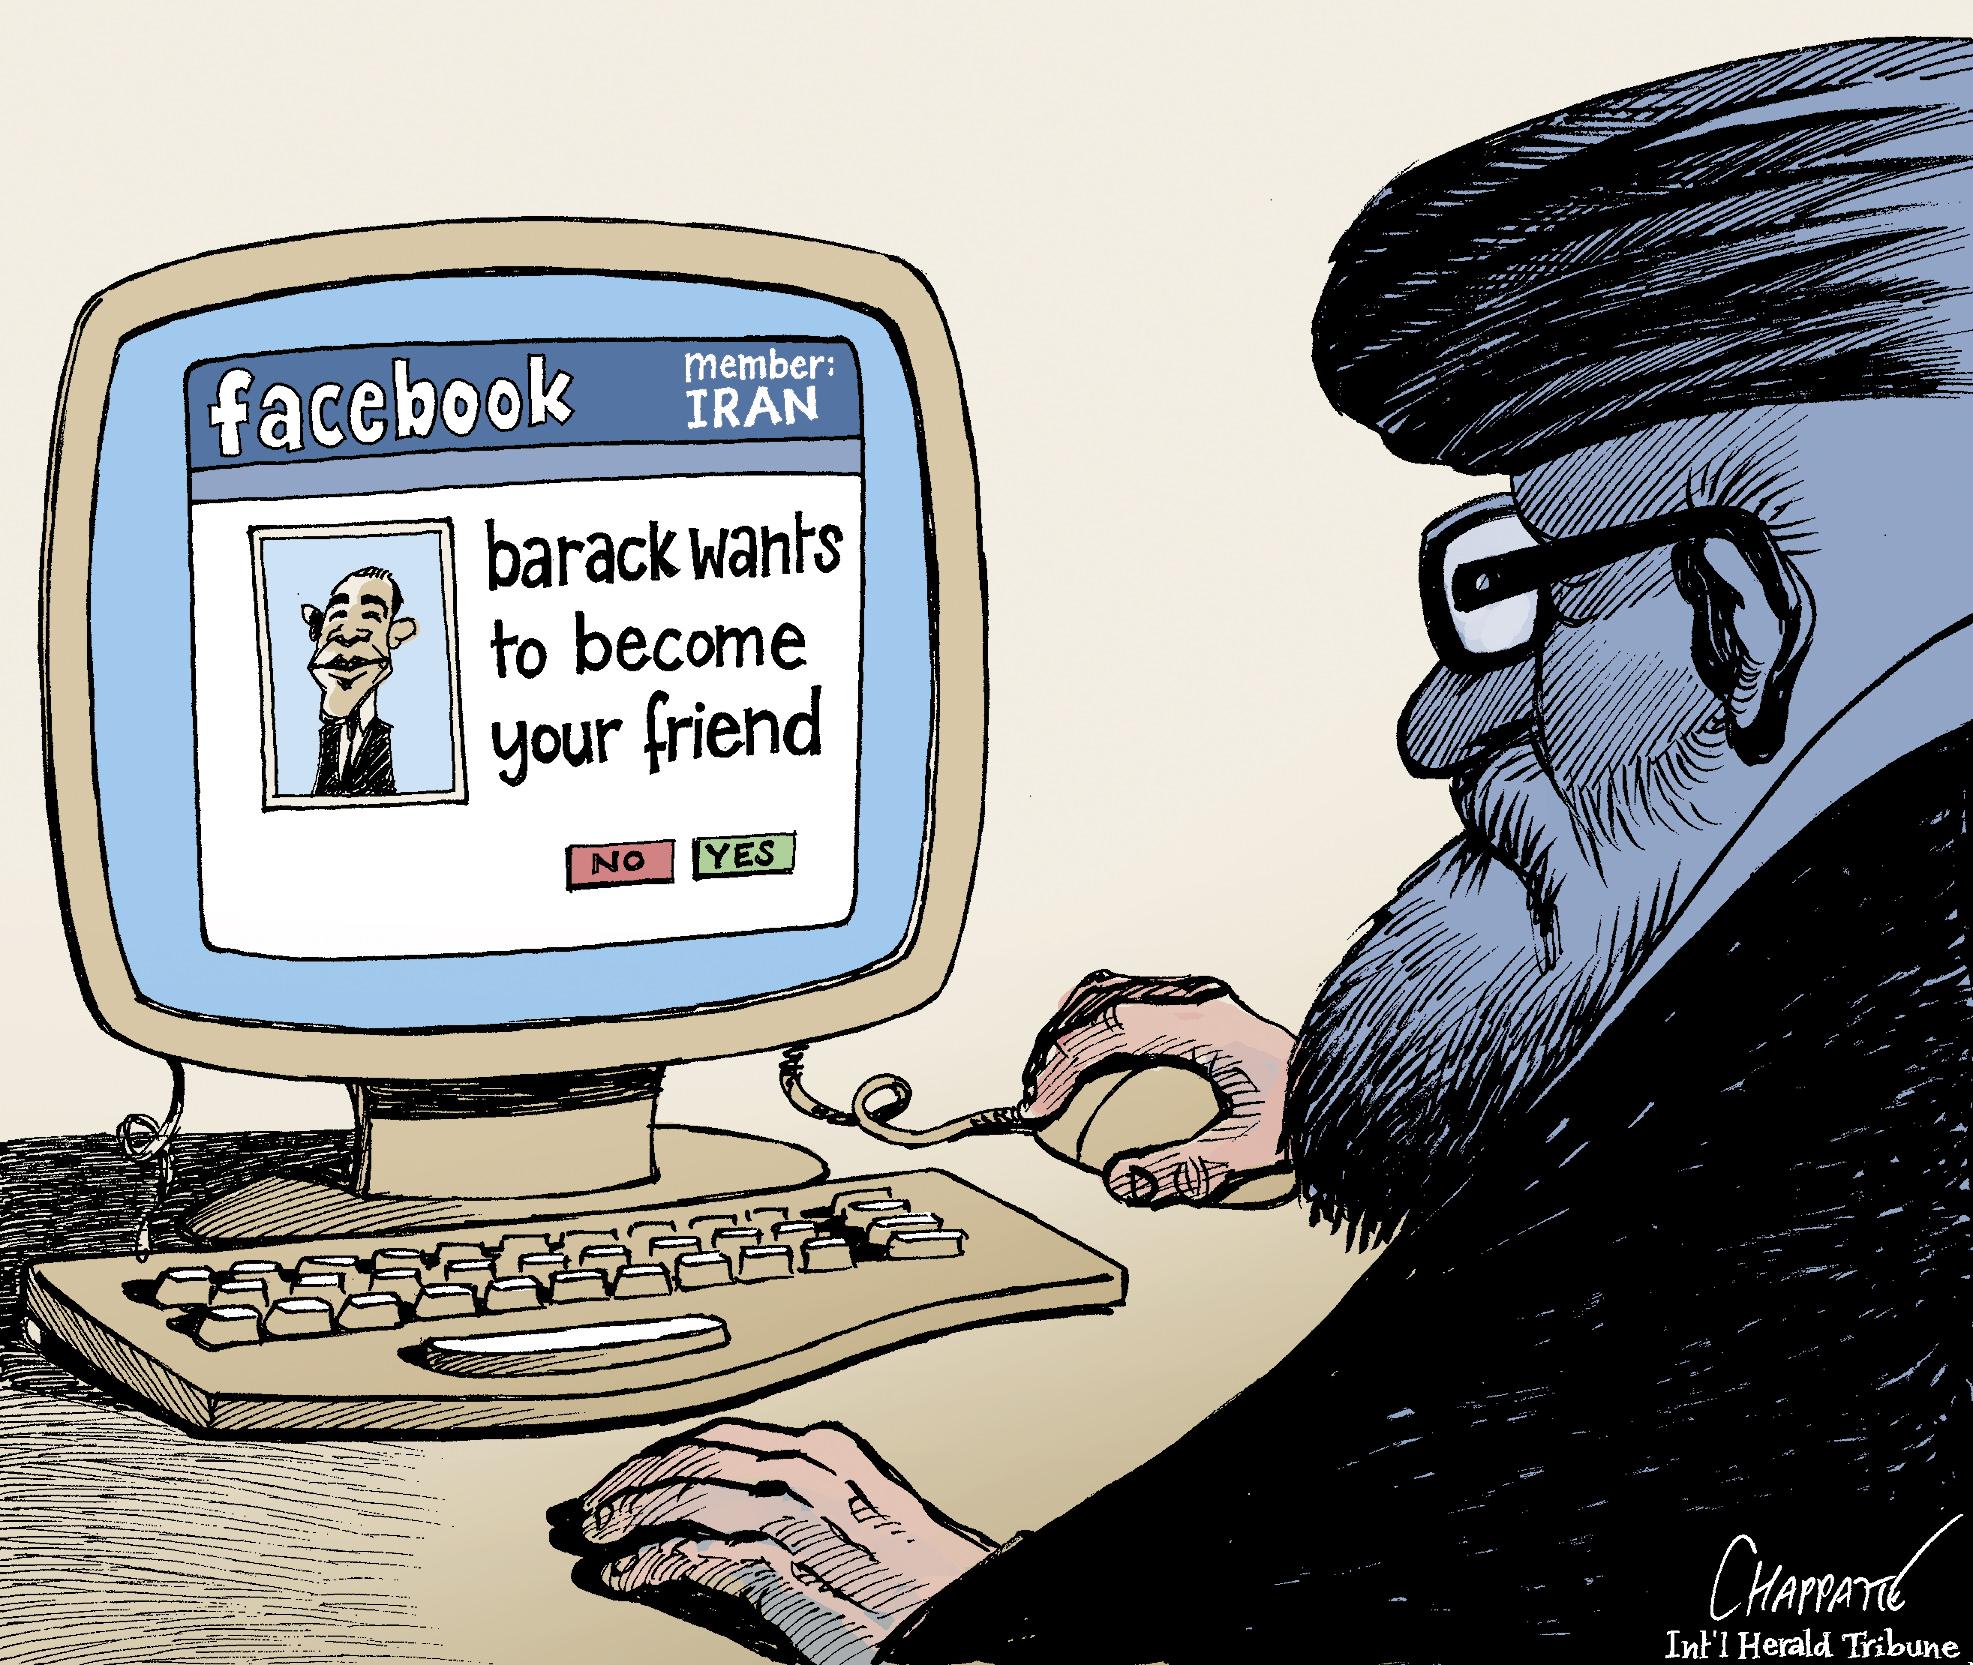 Obama Reaches Out To Iran